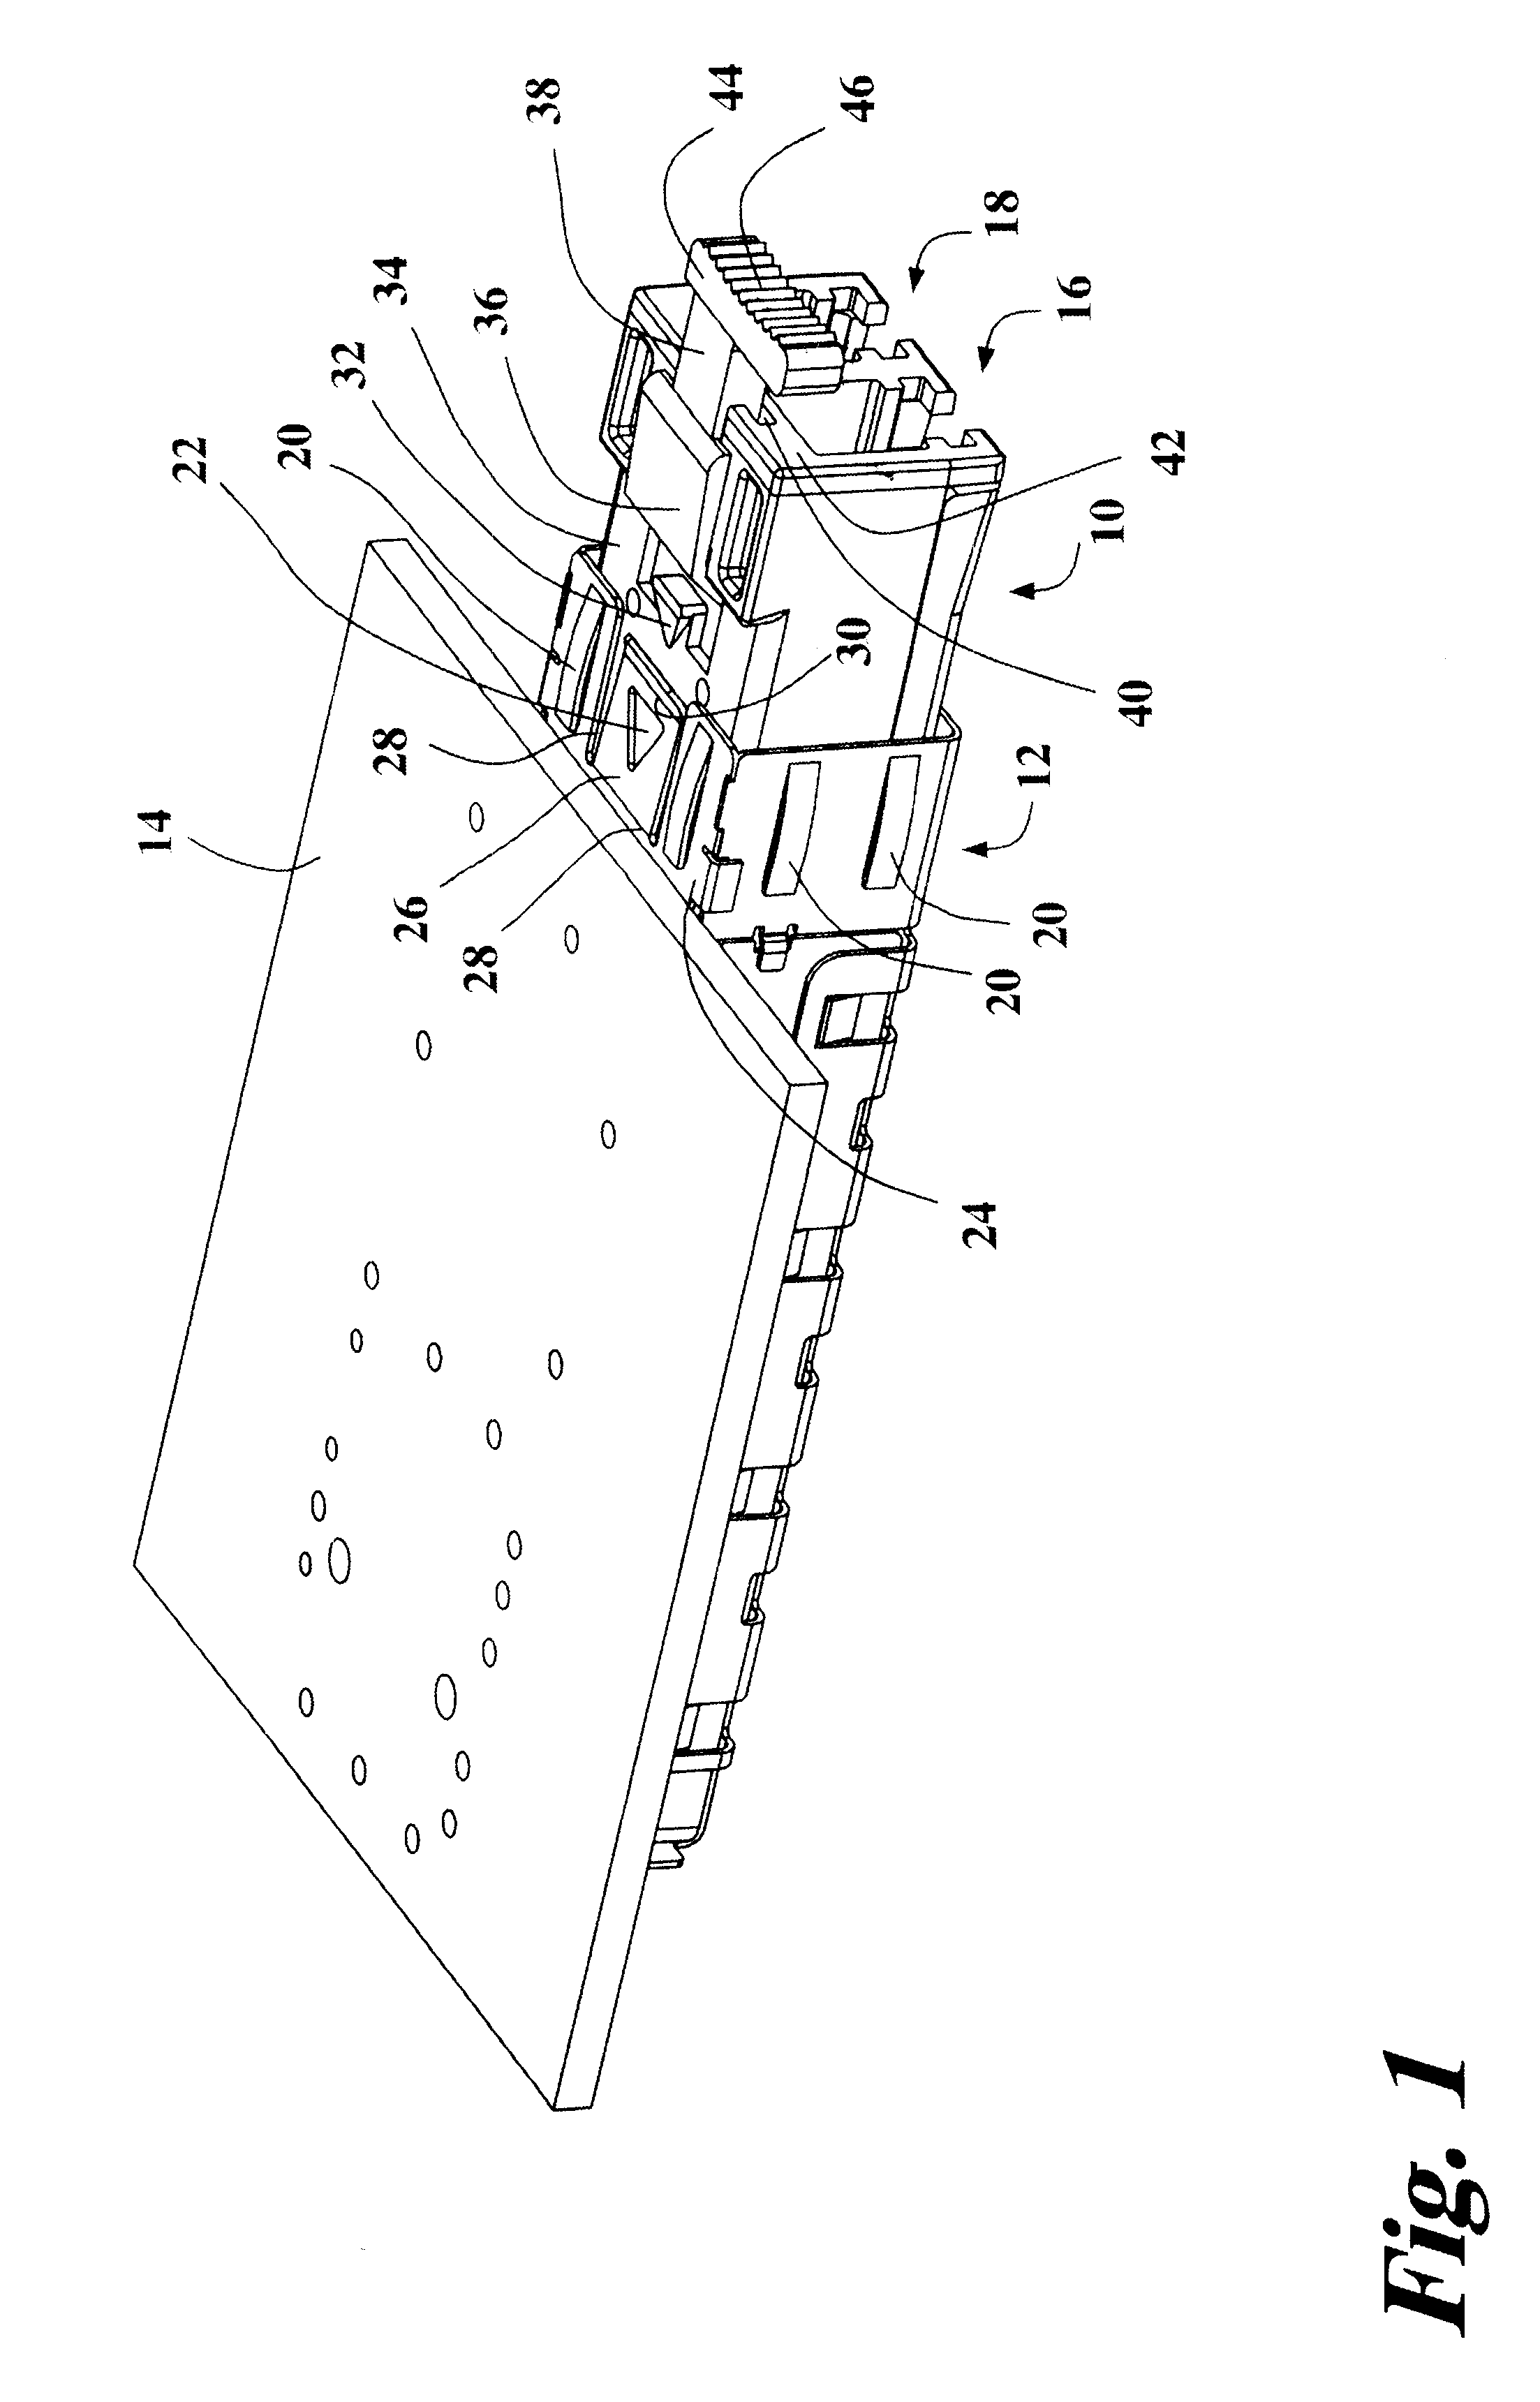 Transceiver module with extended release lever